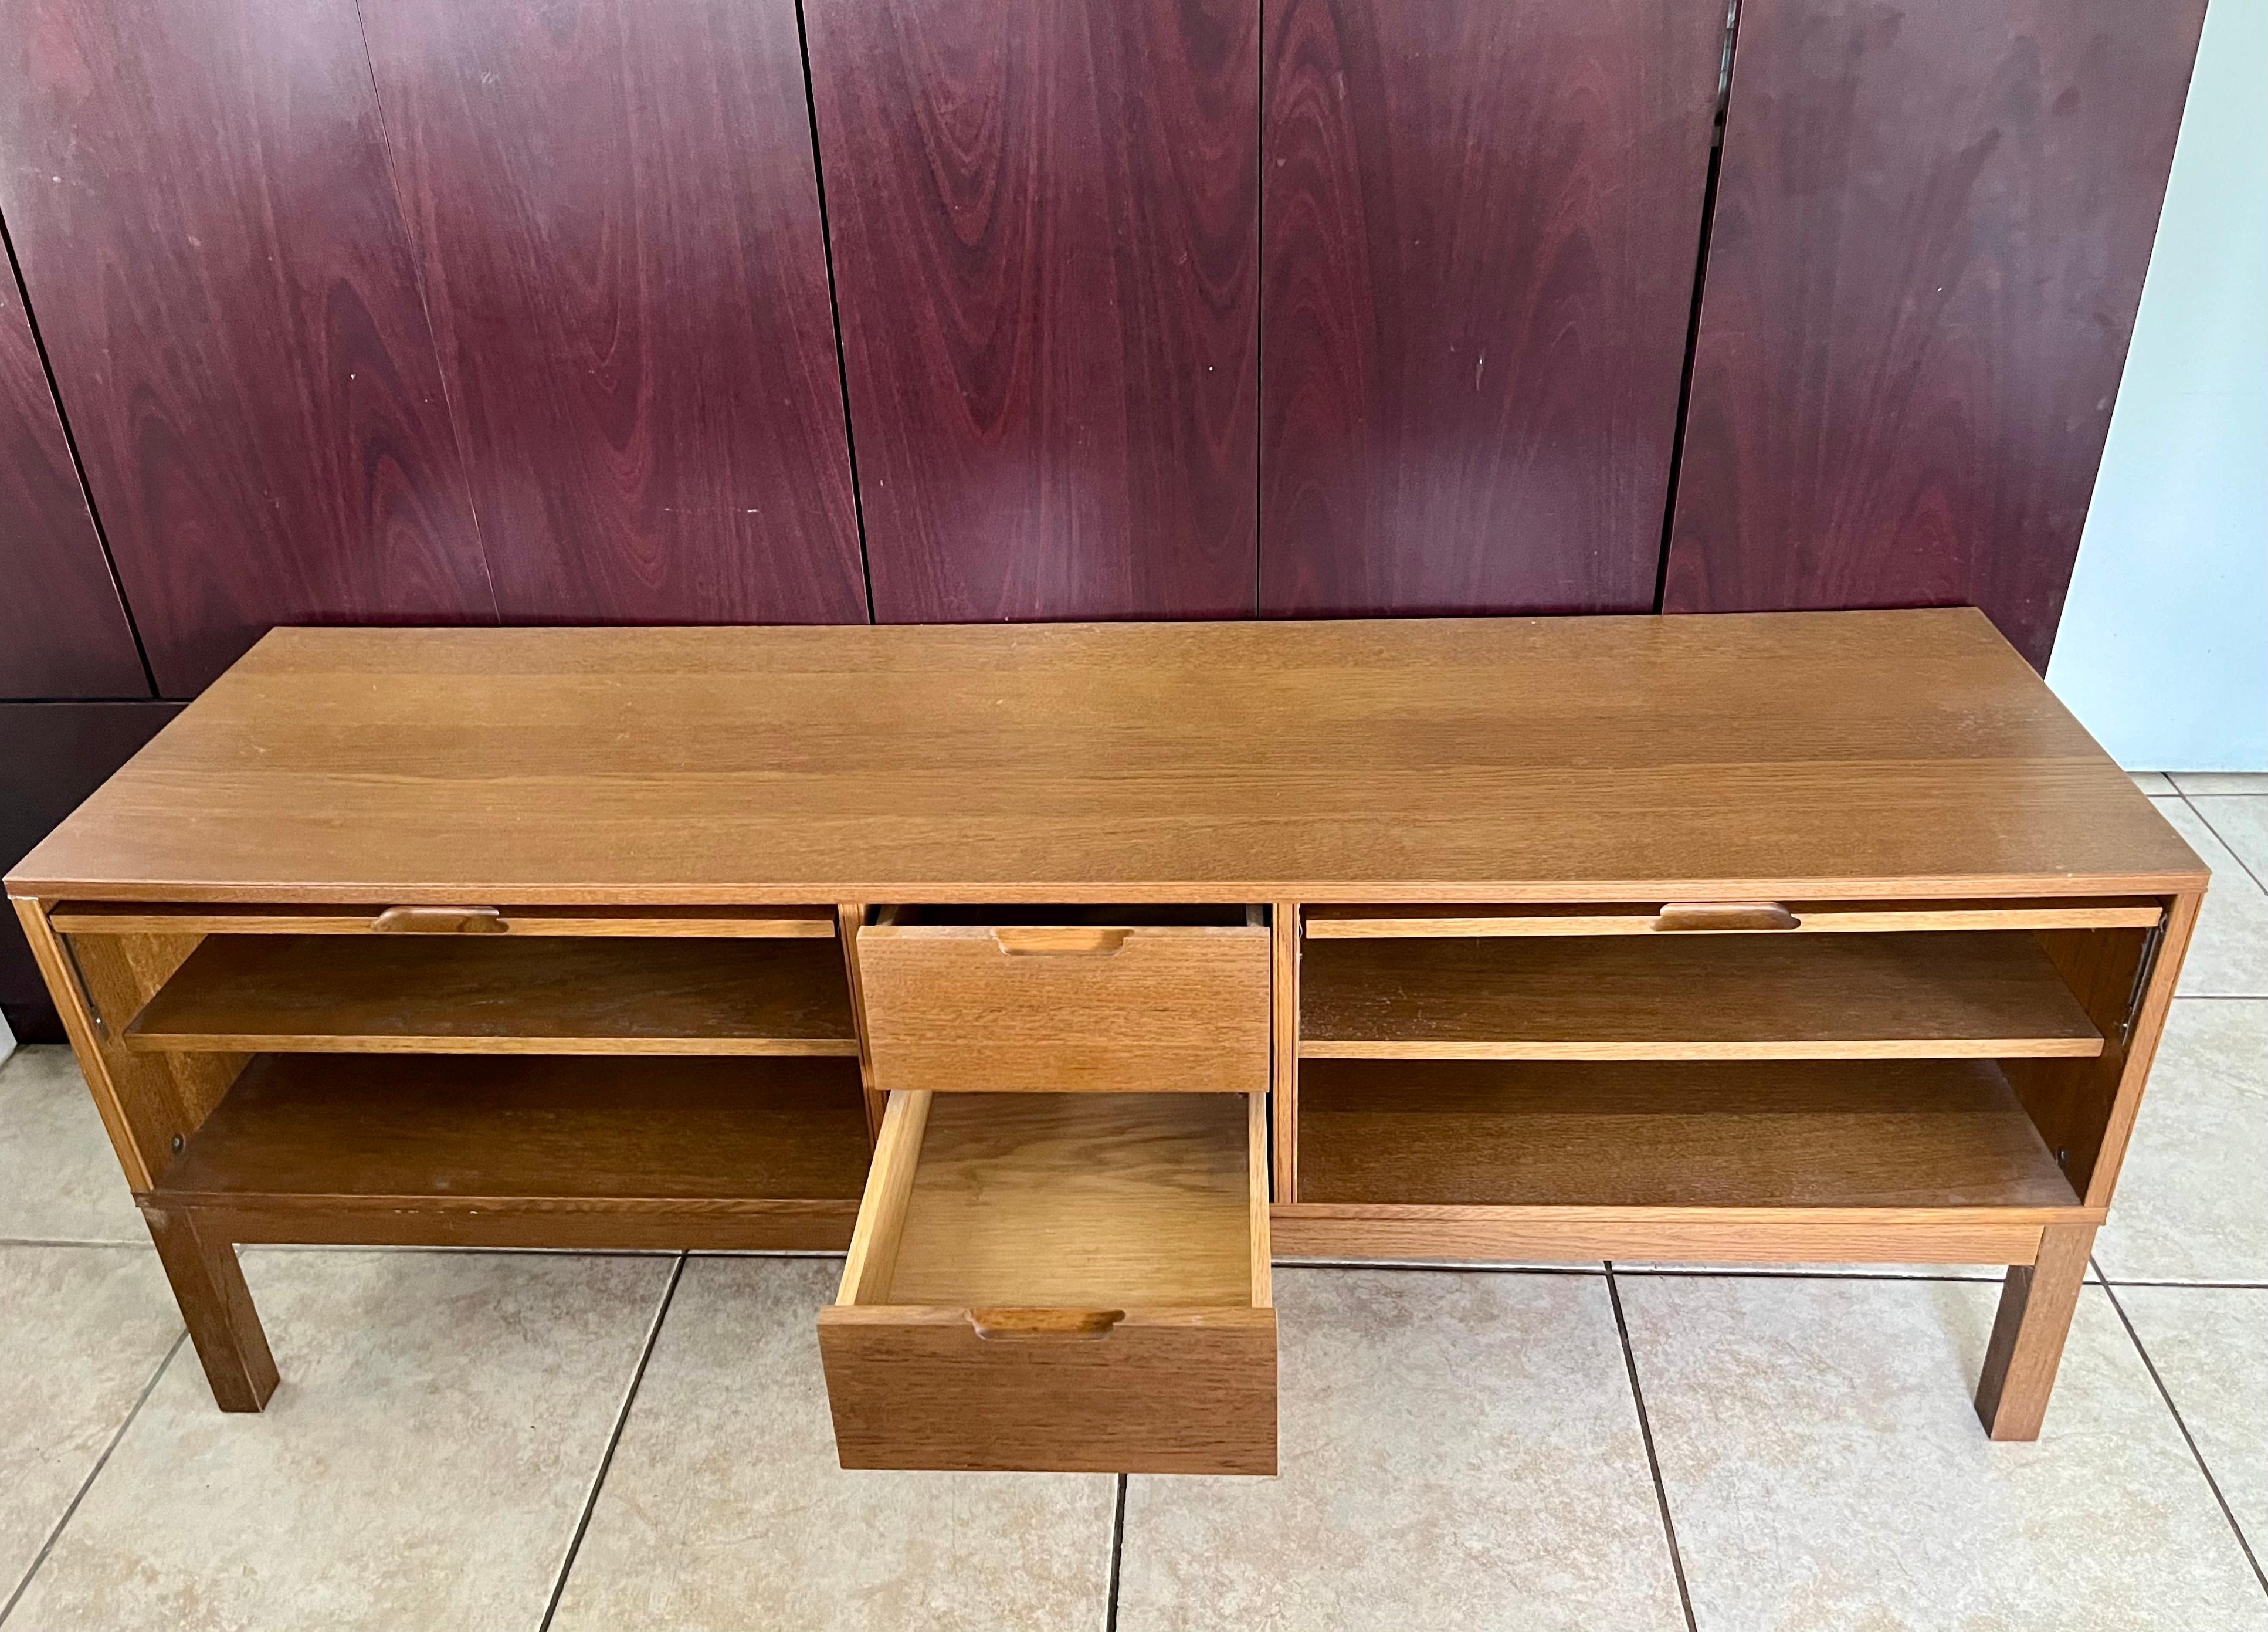 Late 20th Century  Mid Century Modern Scandinavian TV Stand Media Cabinet by IKEA.Circa 1980s  For Sale